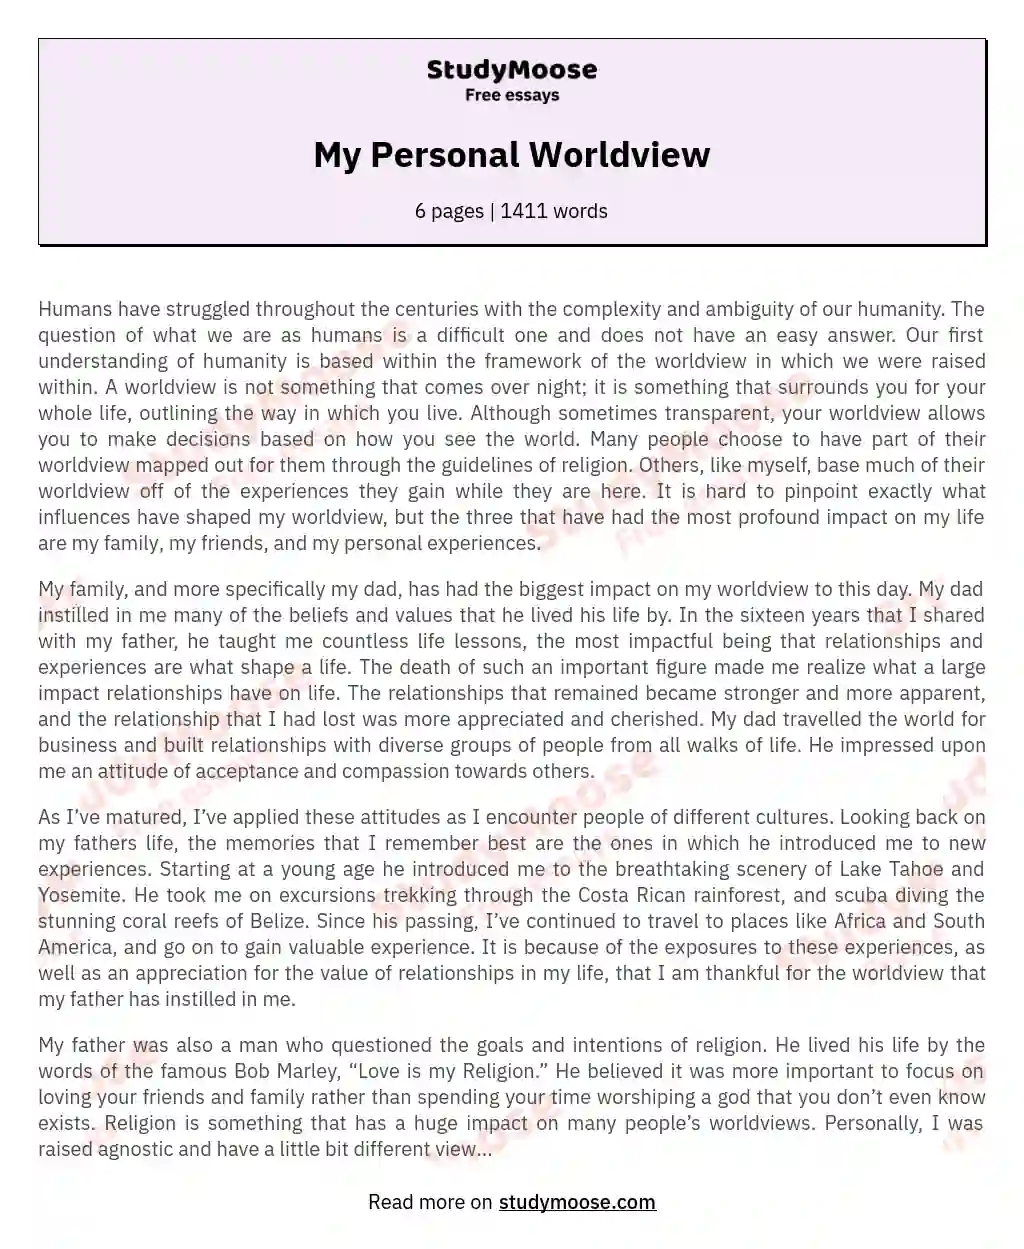 My Personal Worldview essay